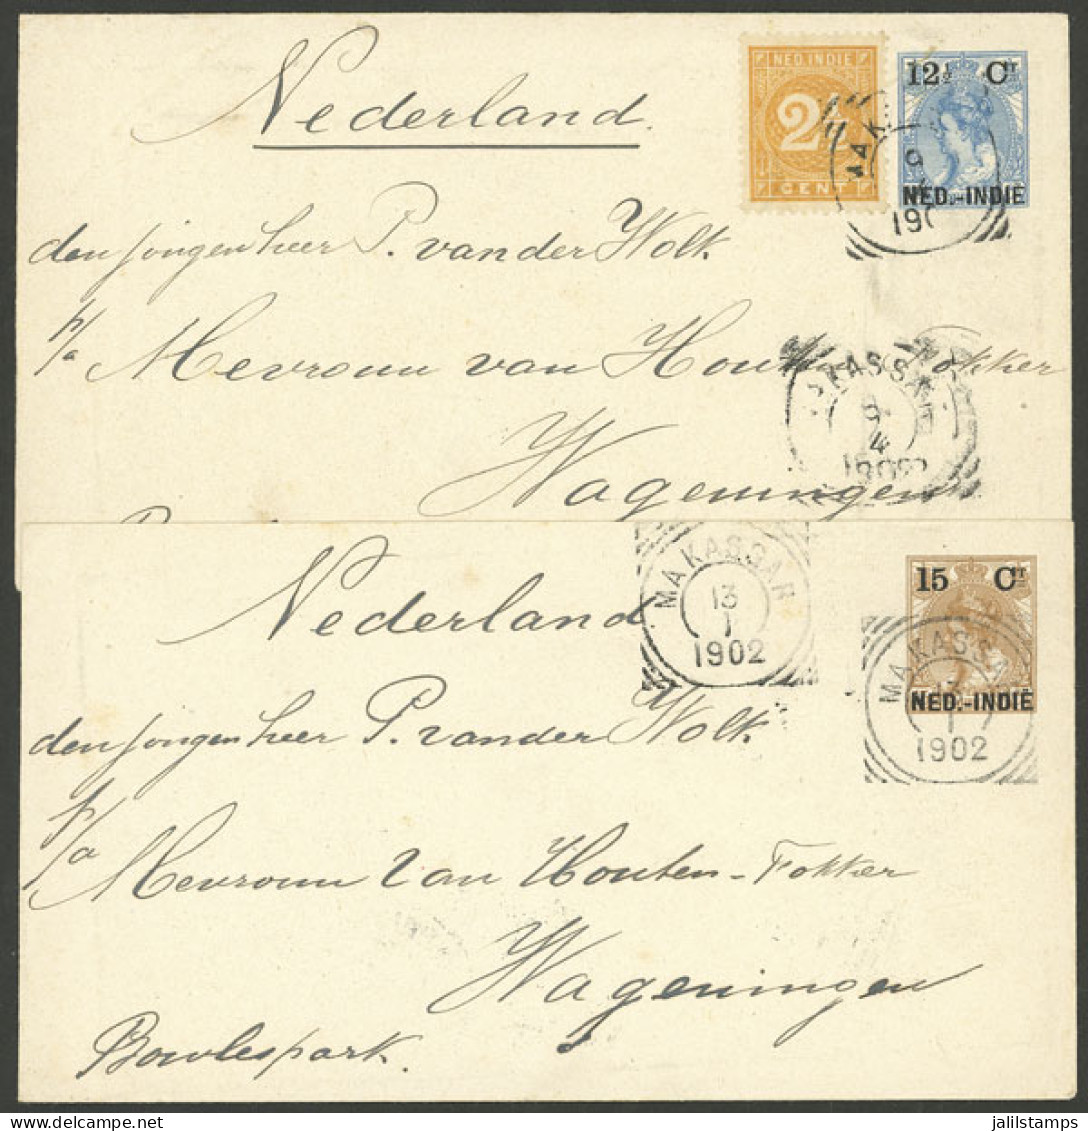 NETHERLANDS INDIES: Provisional Stationery Envelopes Of 15c. And 12½c. + 2½c. Additional Postage, Sent From MAKASSAR To  - Netherlands Indies